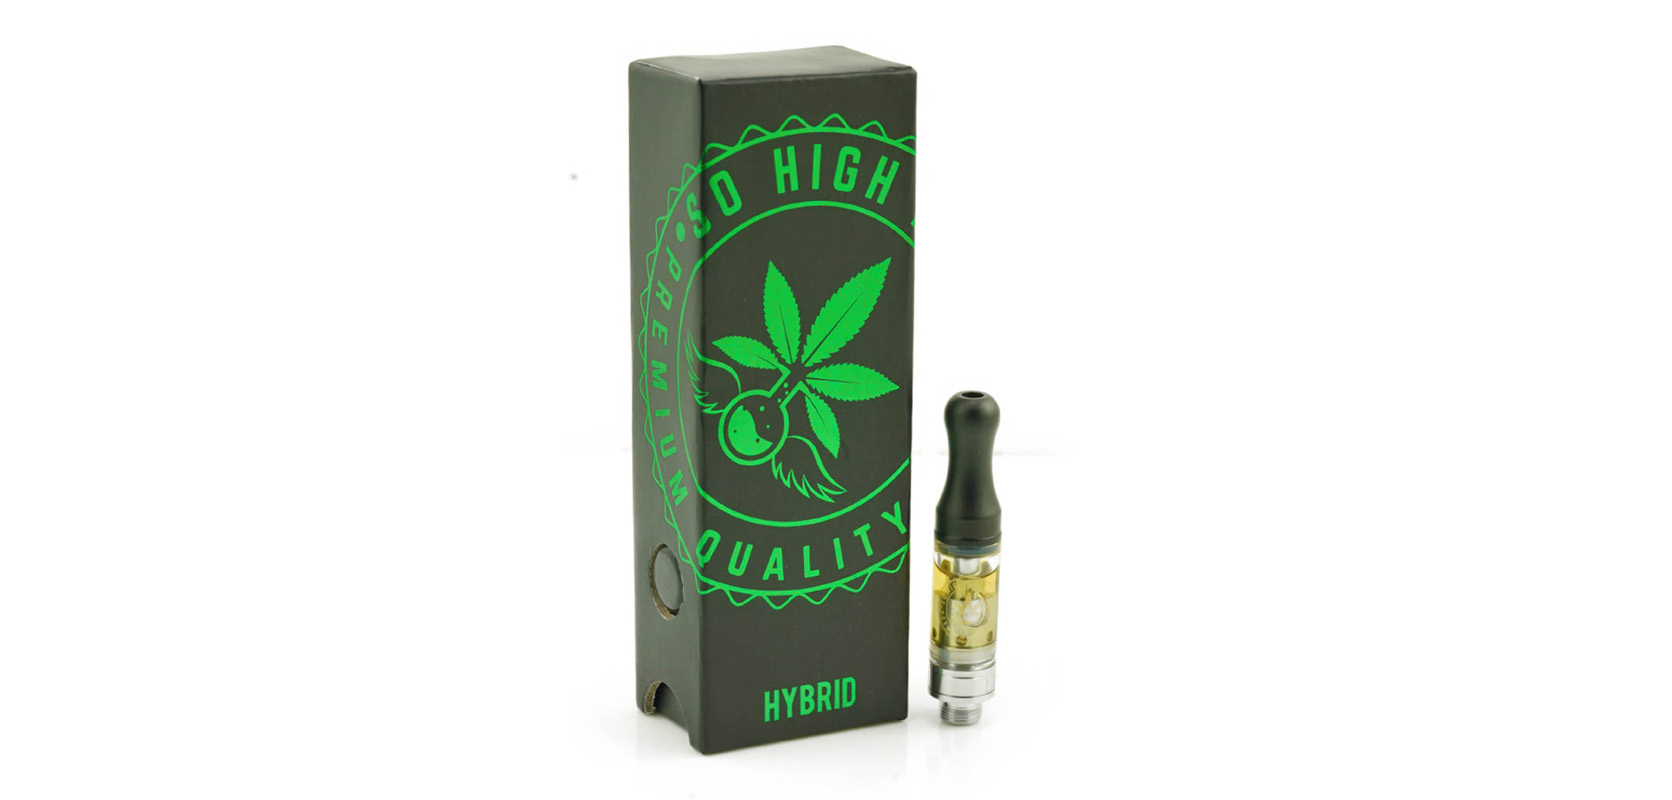 So High Extracts Premium Vape Cartridge for sale online dispensary mail order marijuana cannabis concentrates. weed vapes.